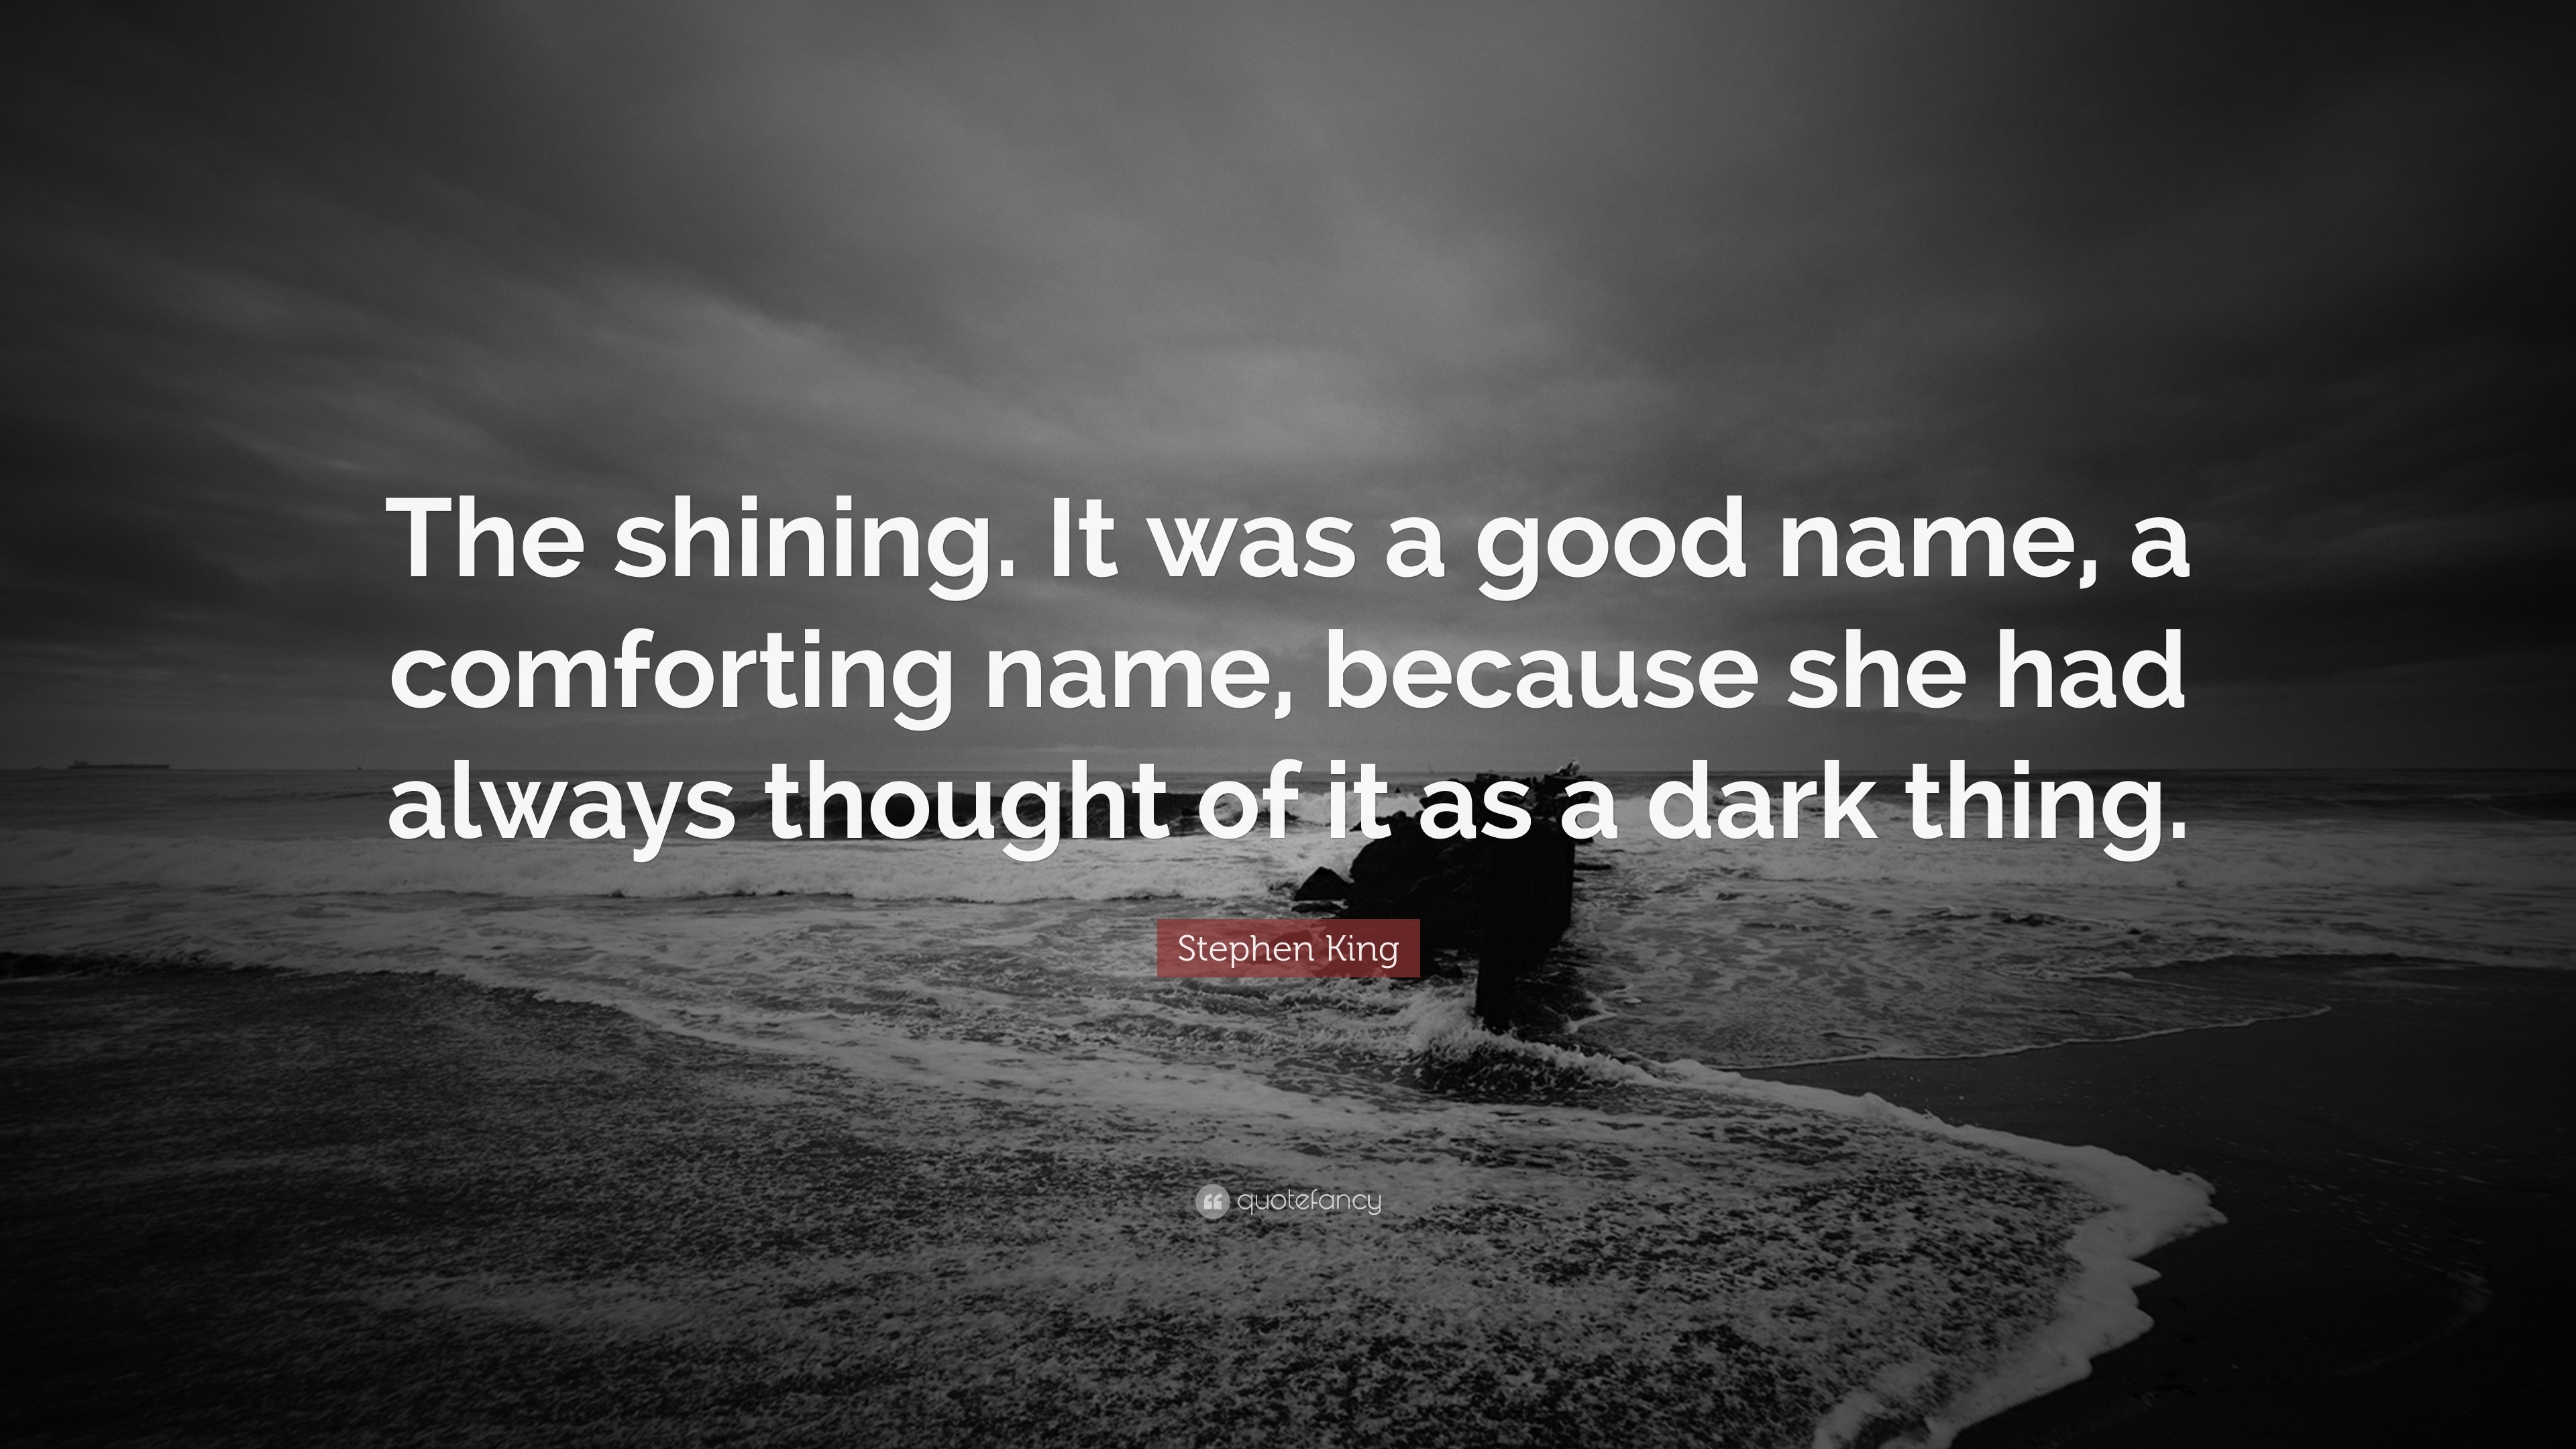 3840x2160 Stephen King Quote: “The shining. It was a good name, a comforting